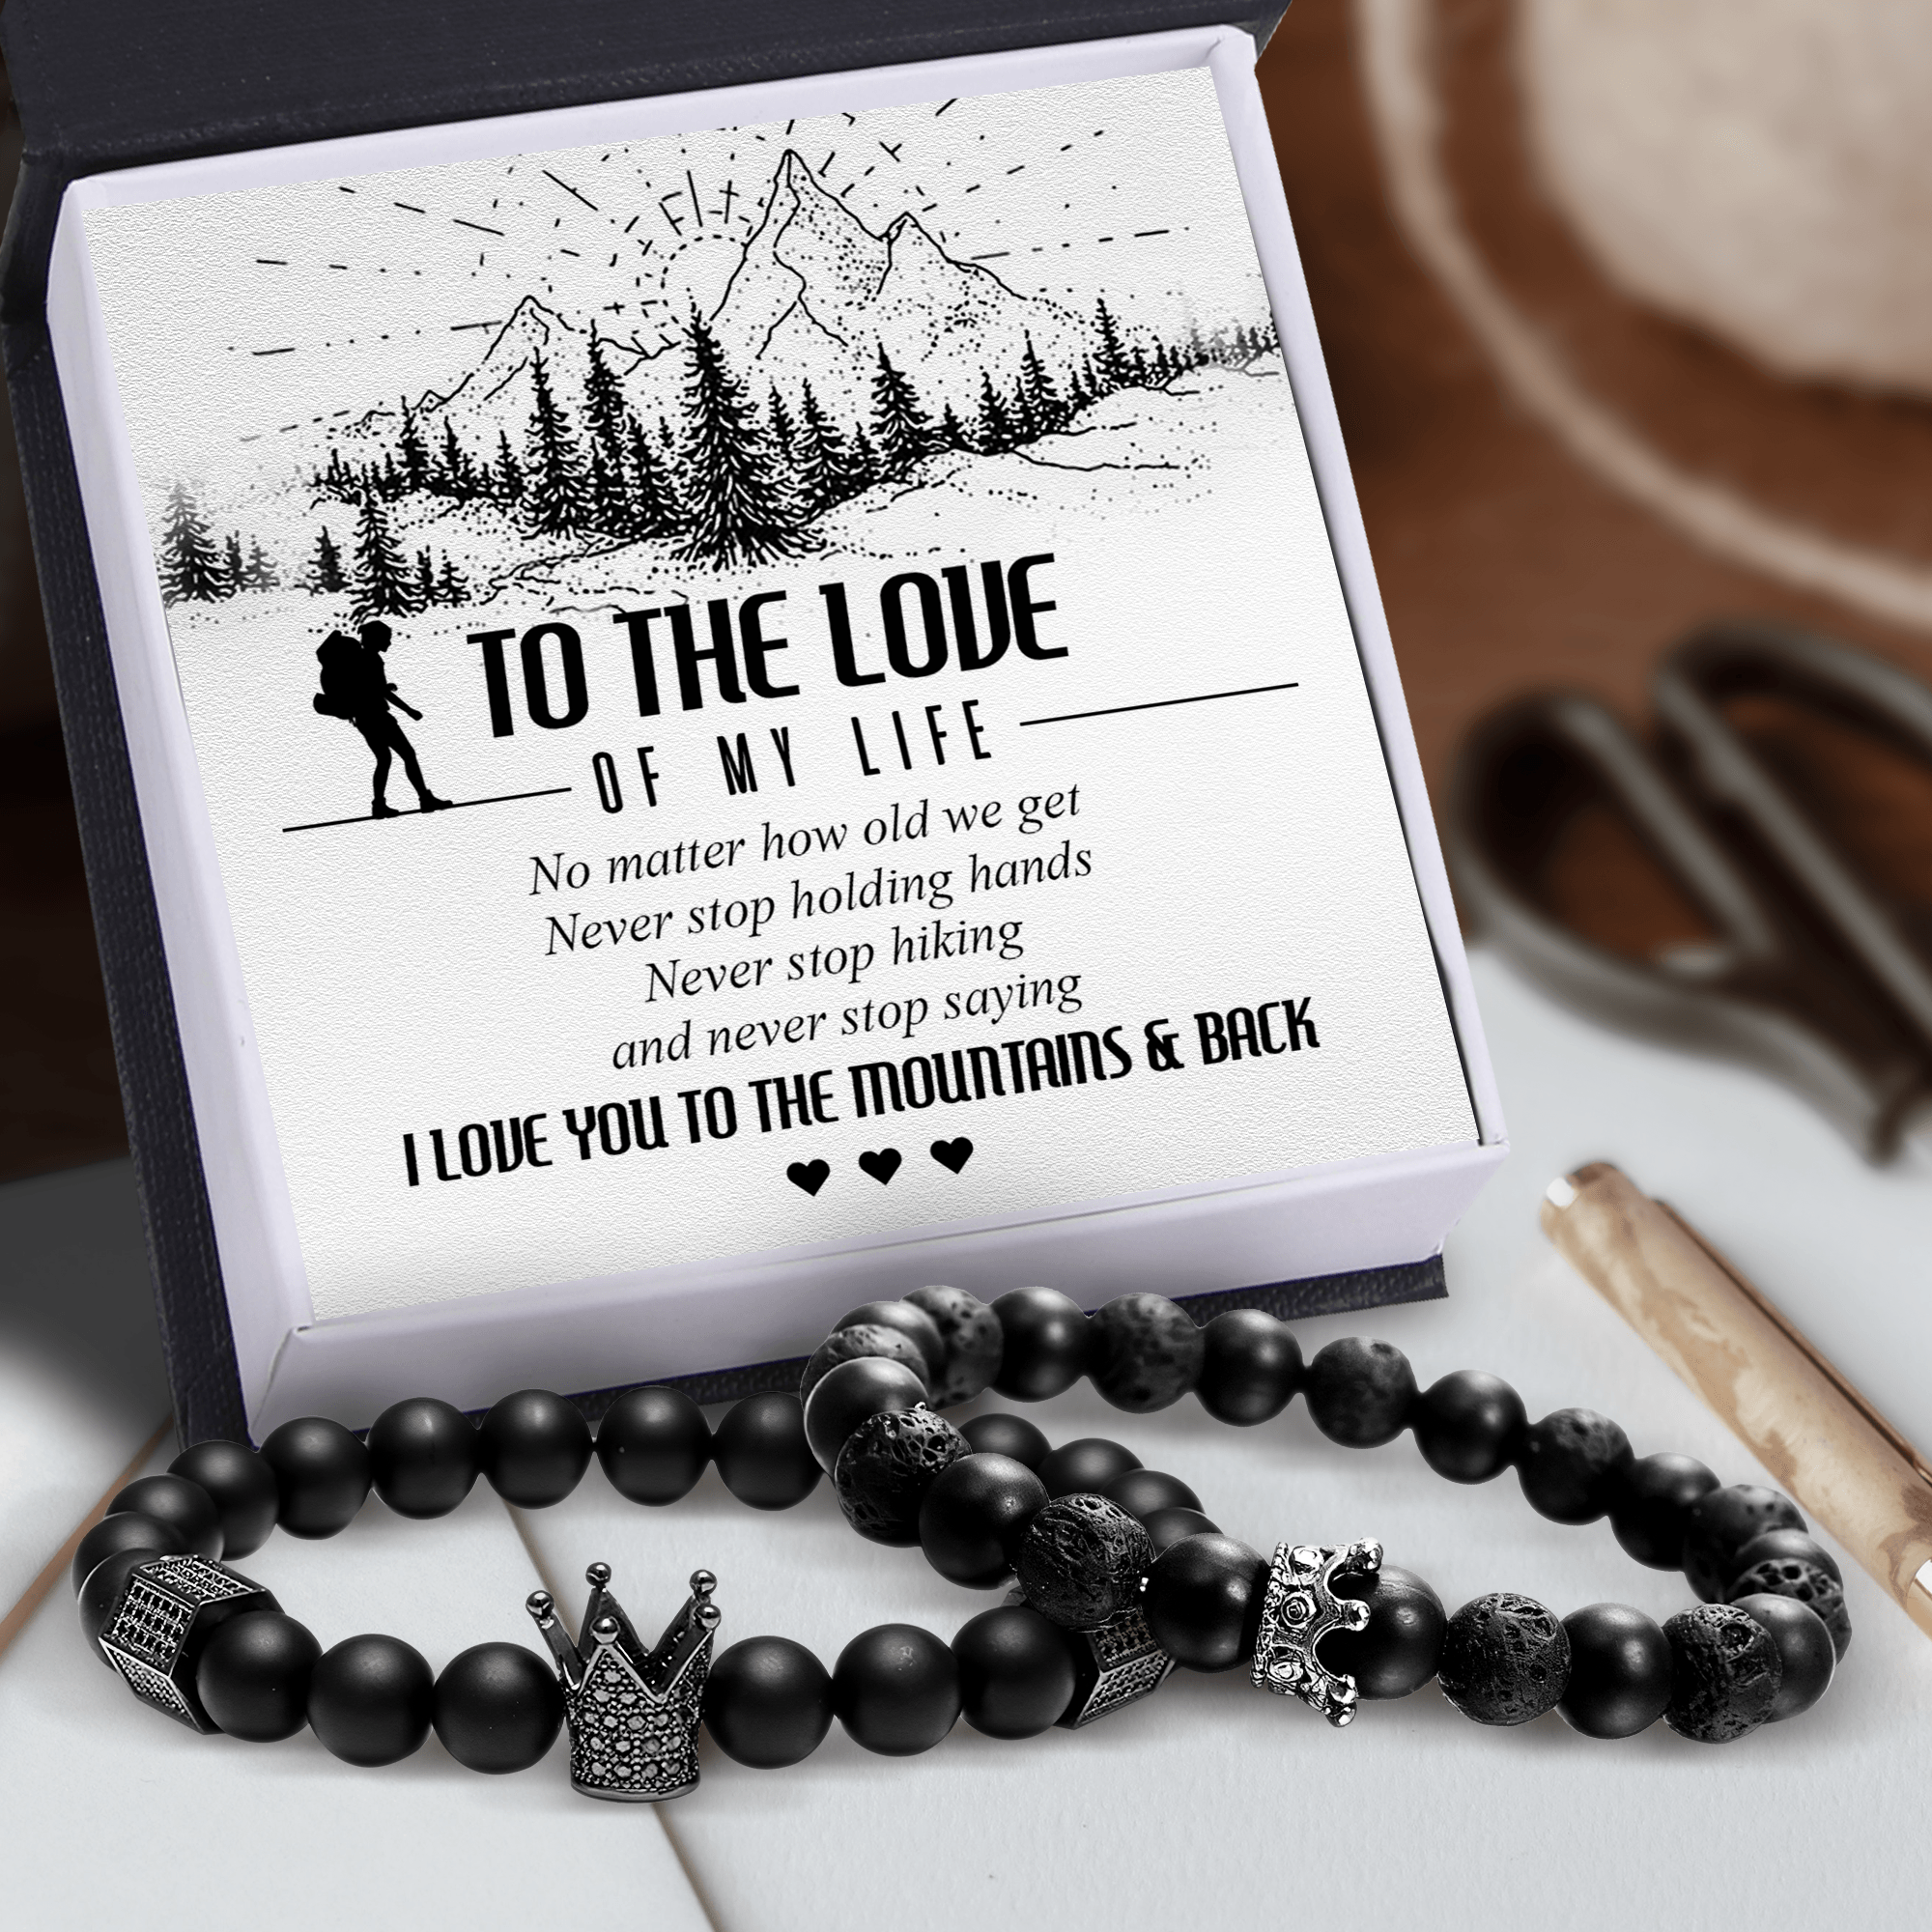 King & Queen Couple Bracelets - Hiking - To The Love Of My Life - I Love You To The Mountains & Back - Augbae13008 - Gifts Holder